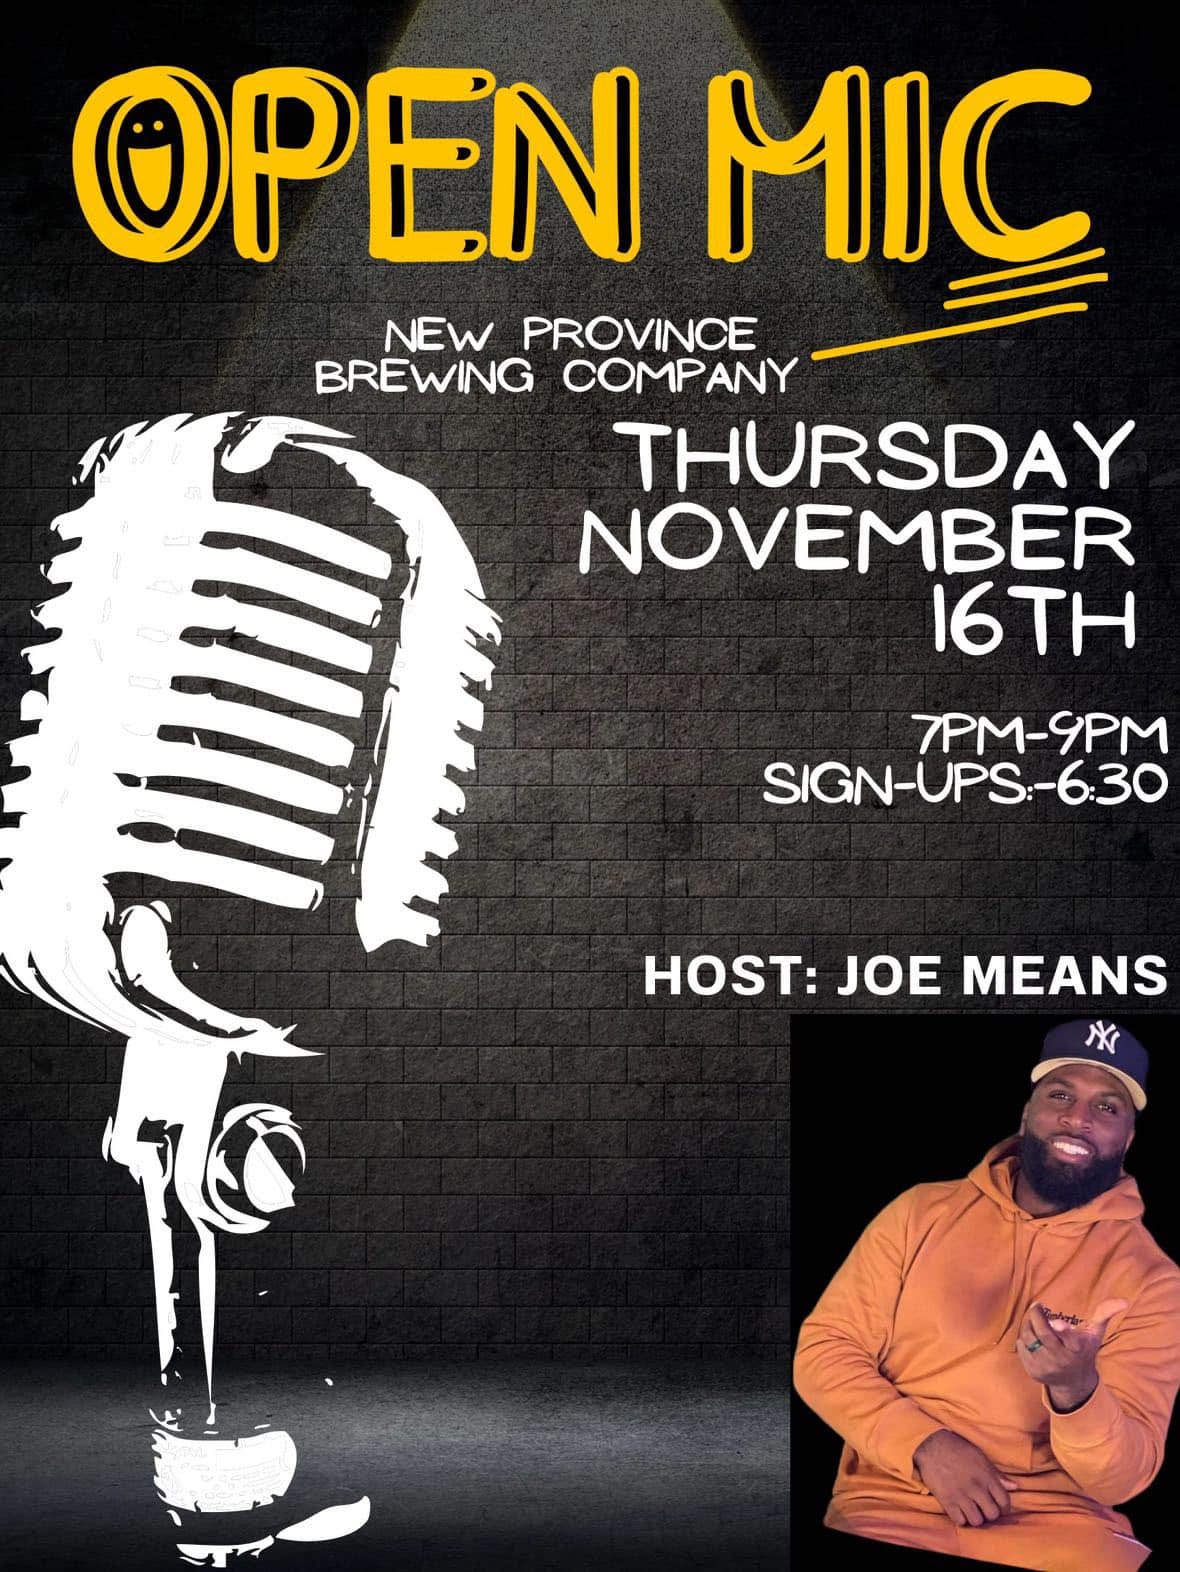 May be an image of 1 person and text that says 'OPEN MIC NEW PROVINCE BREWING COMPANY THURSDAY NOVEMBER 16TH 7PM-9PM SIGN-UPS:-6:30 HOST: JOE MEANS'